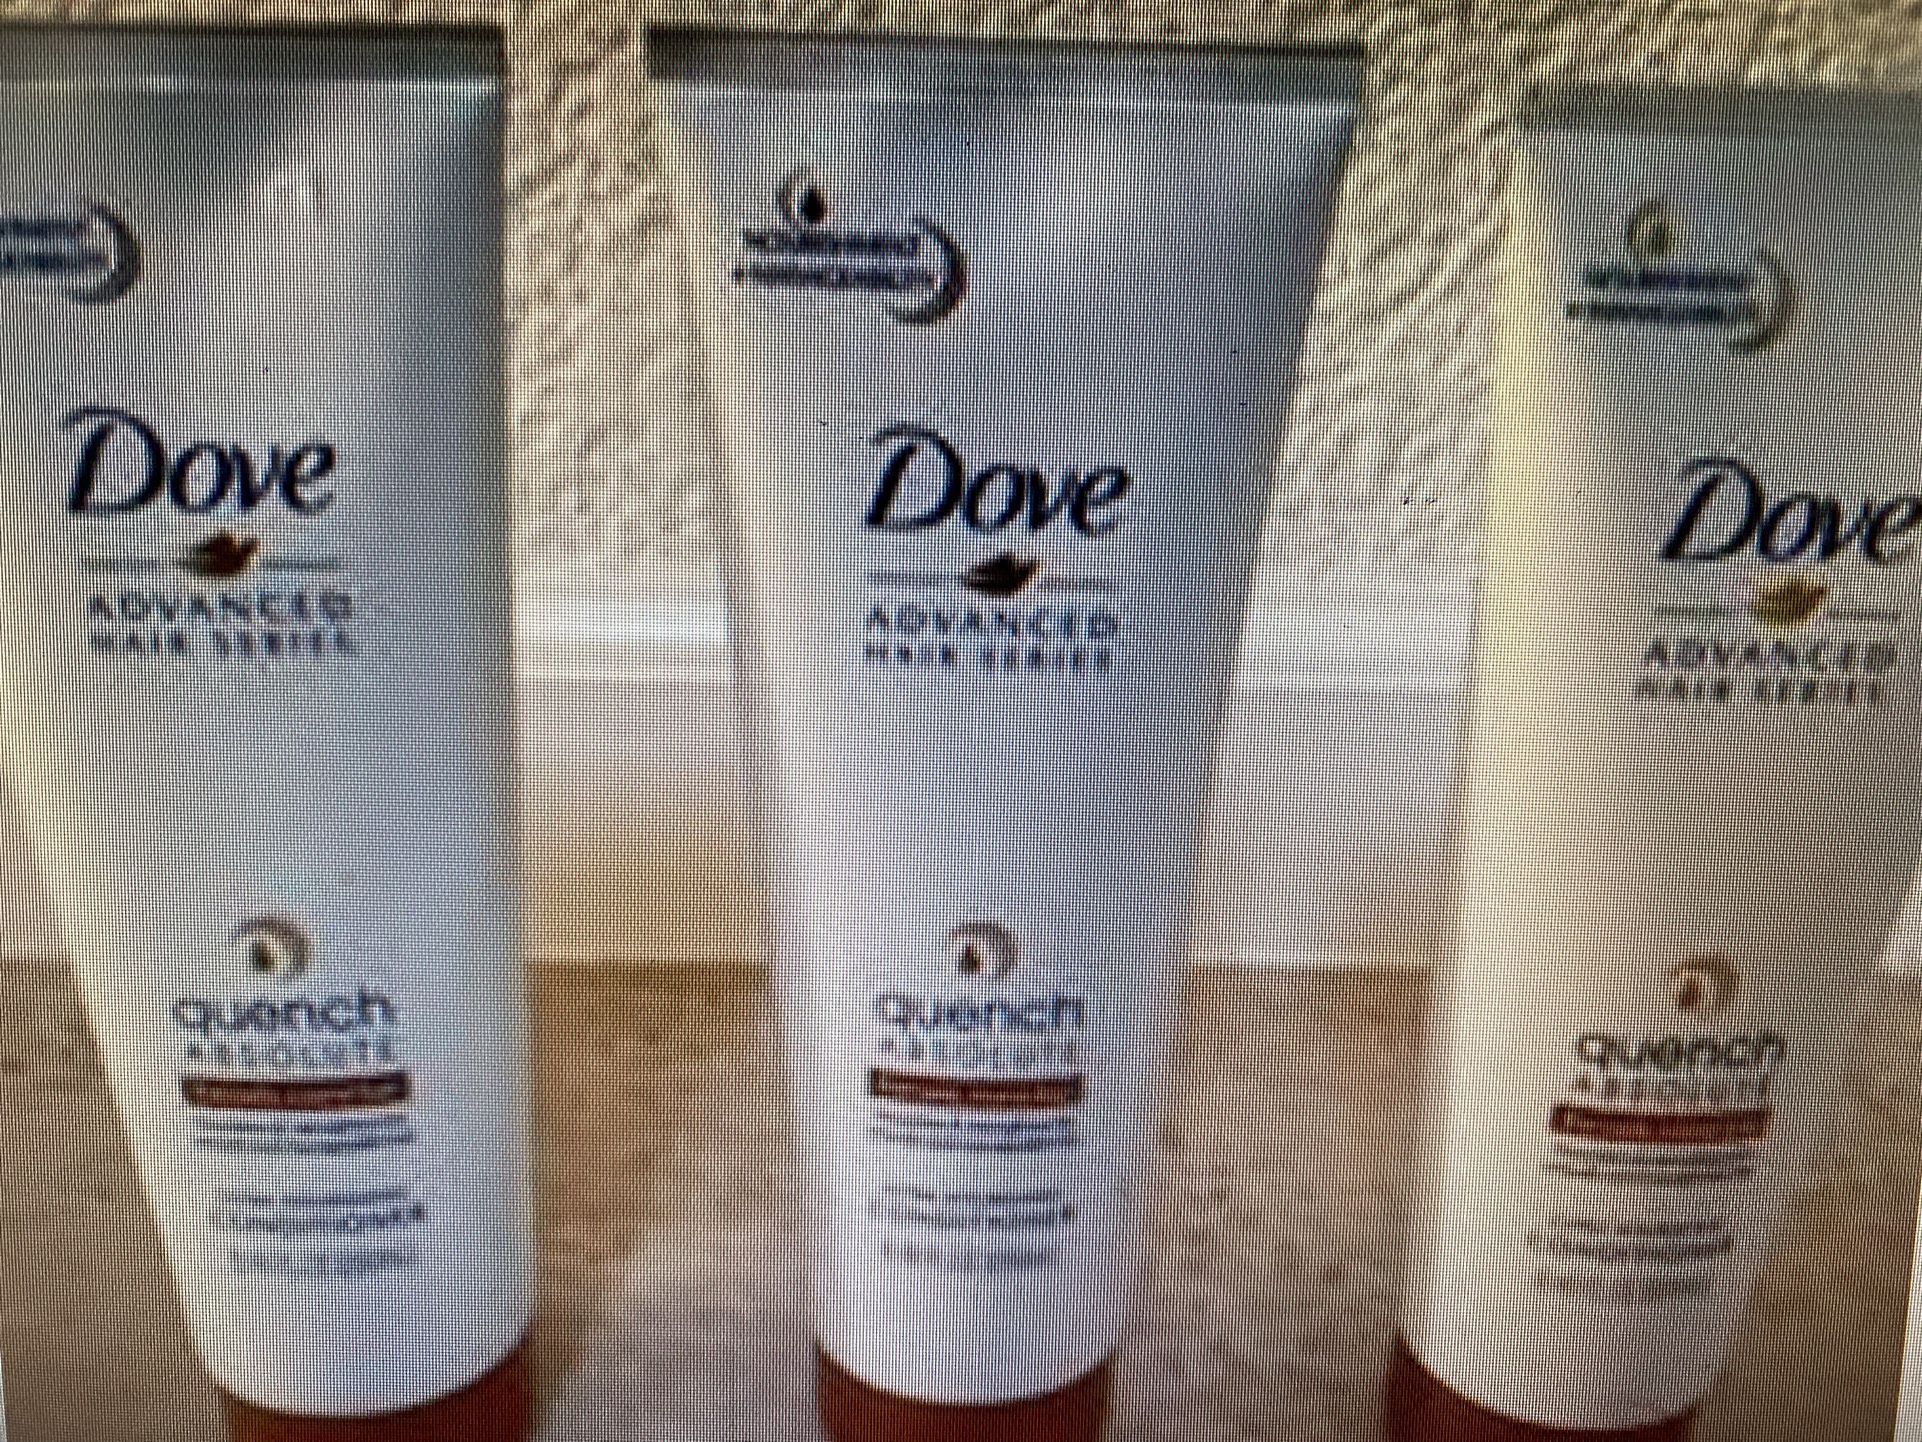 New Dove Quench Absolute Conditioners for Curly, Coarse Hair